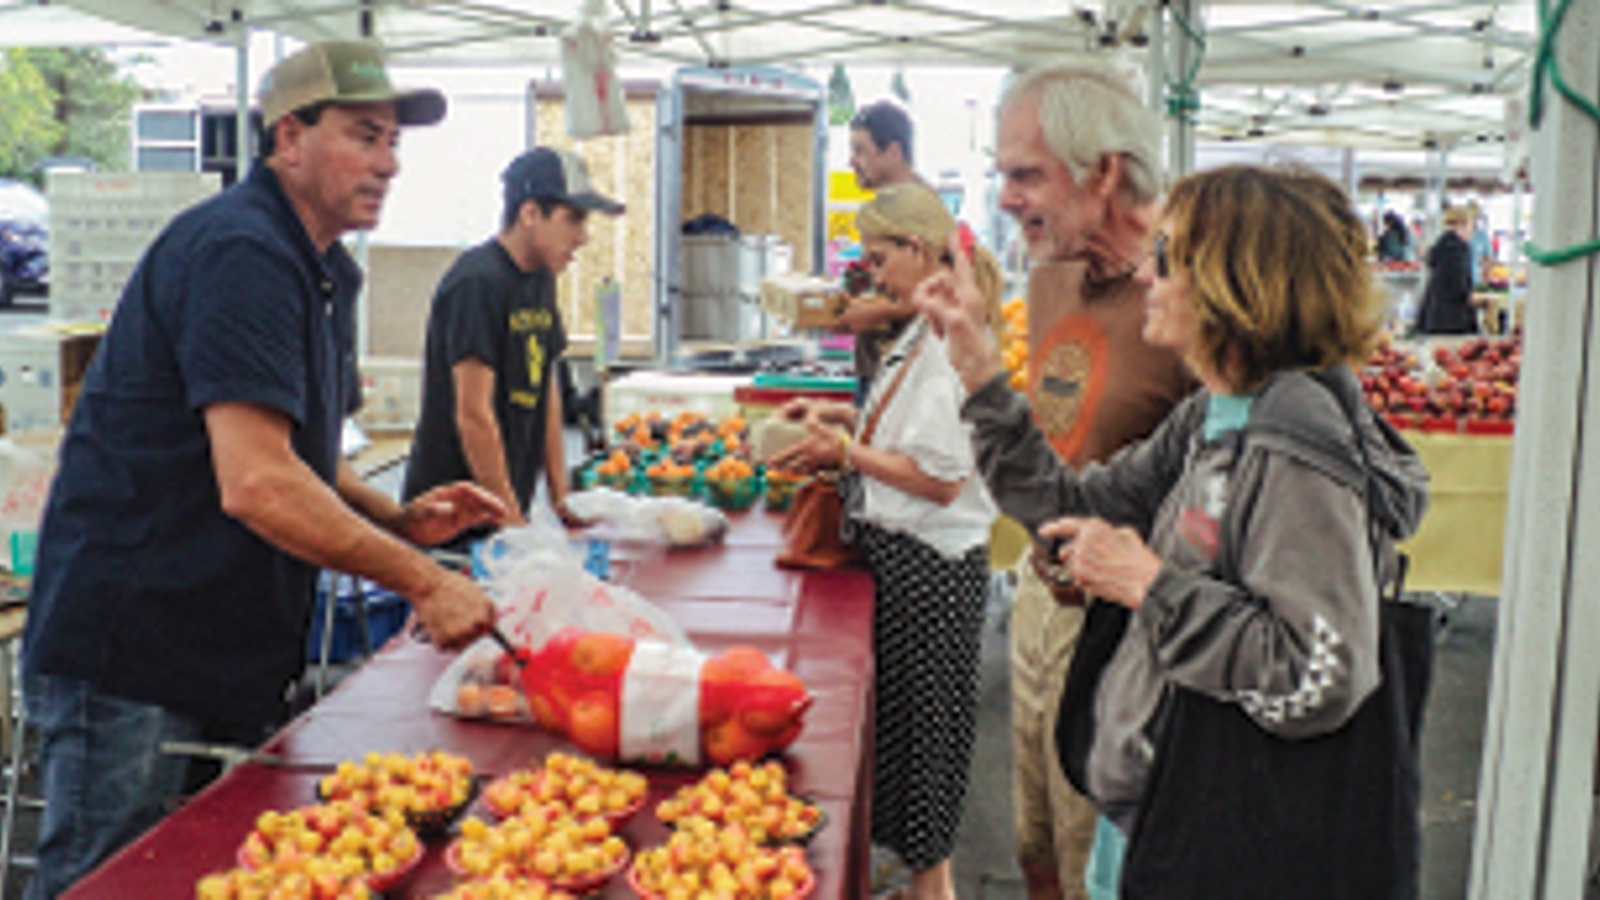 Farmers markets rebound, but pandemic effects linger